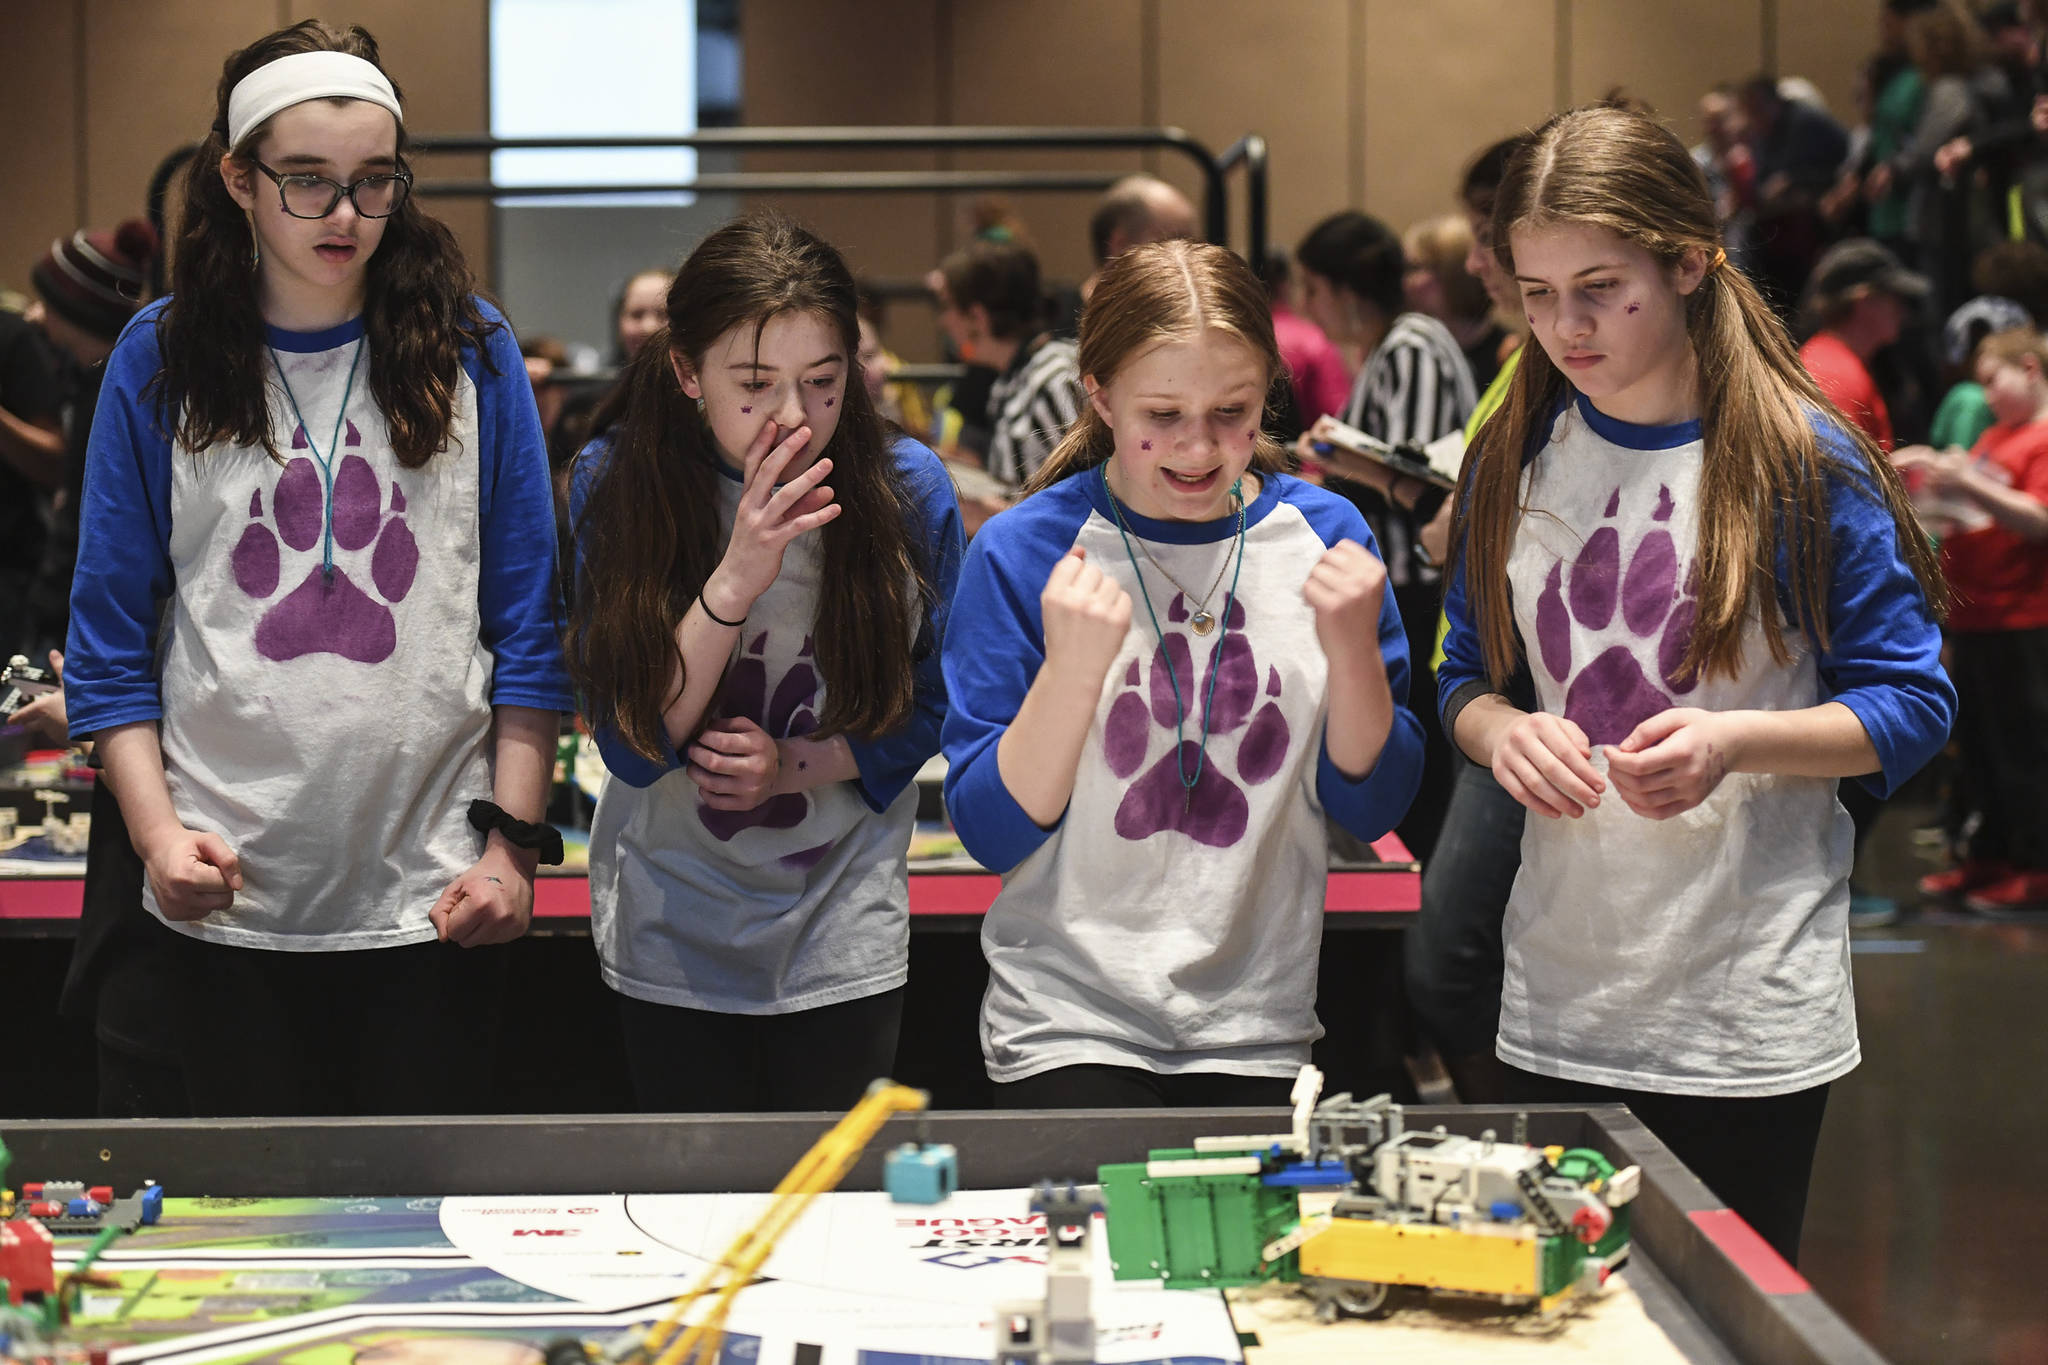 Jamboree brings together robots, solutions to city problems